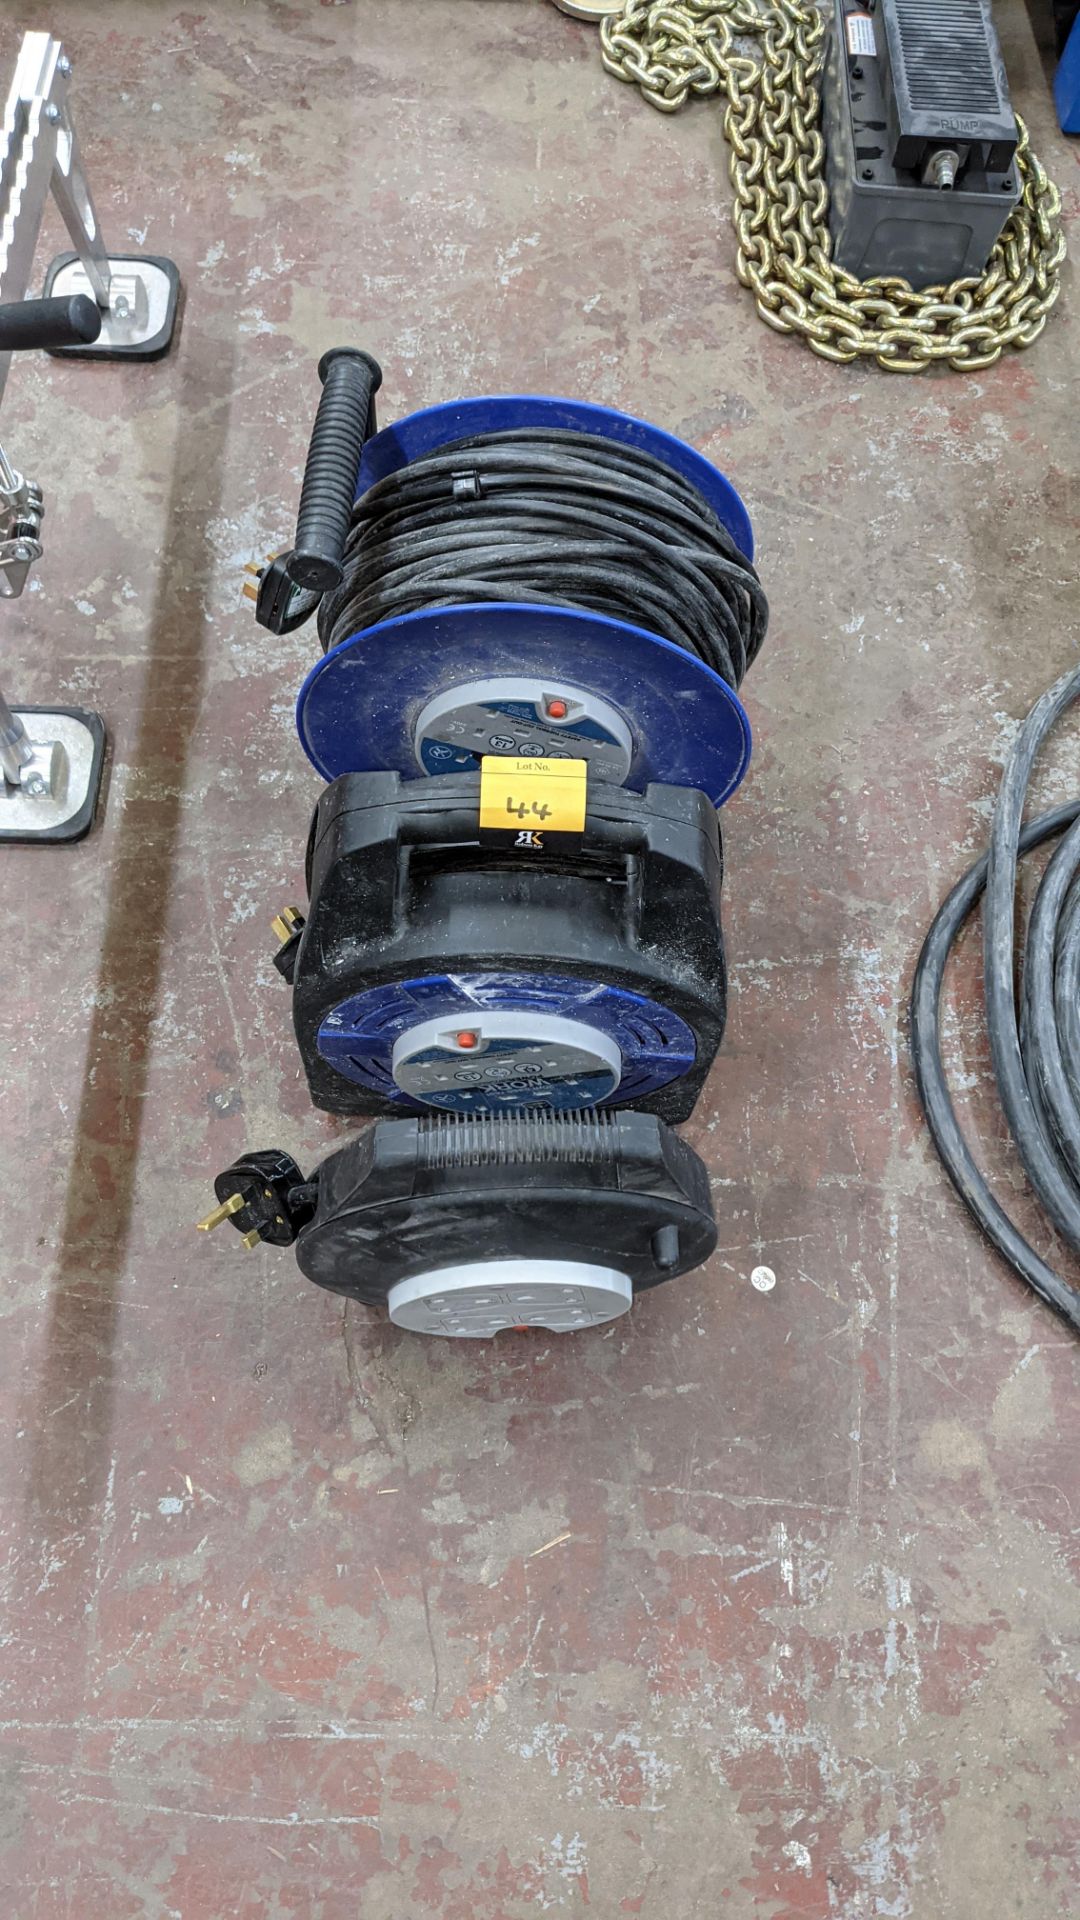 3 off assorted multi-socket electrical extension reels